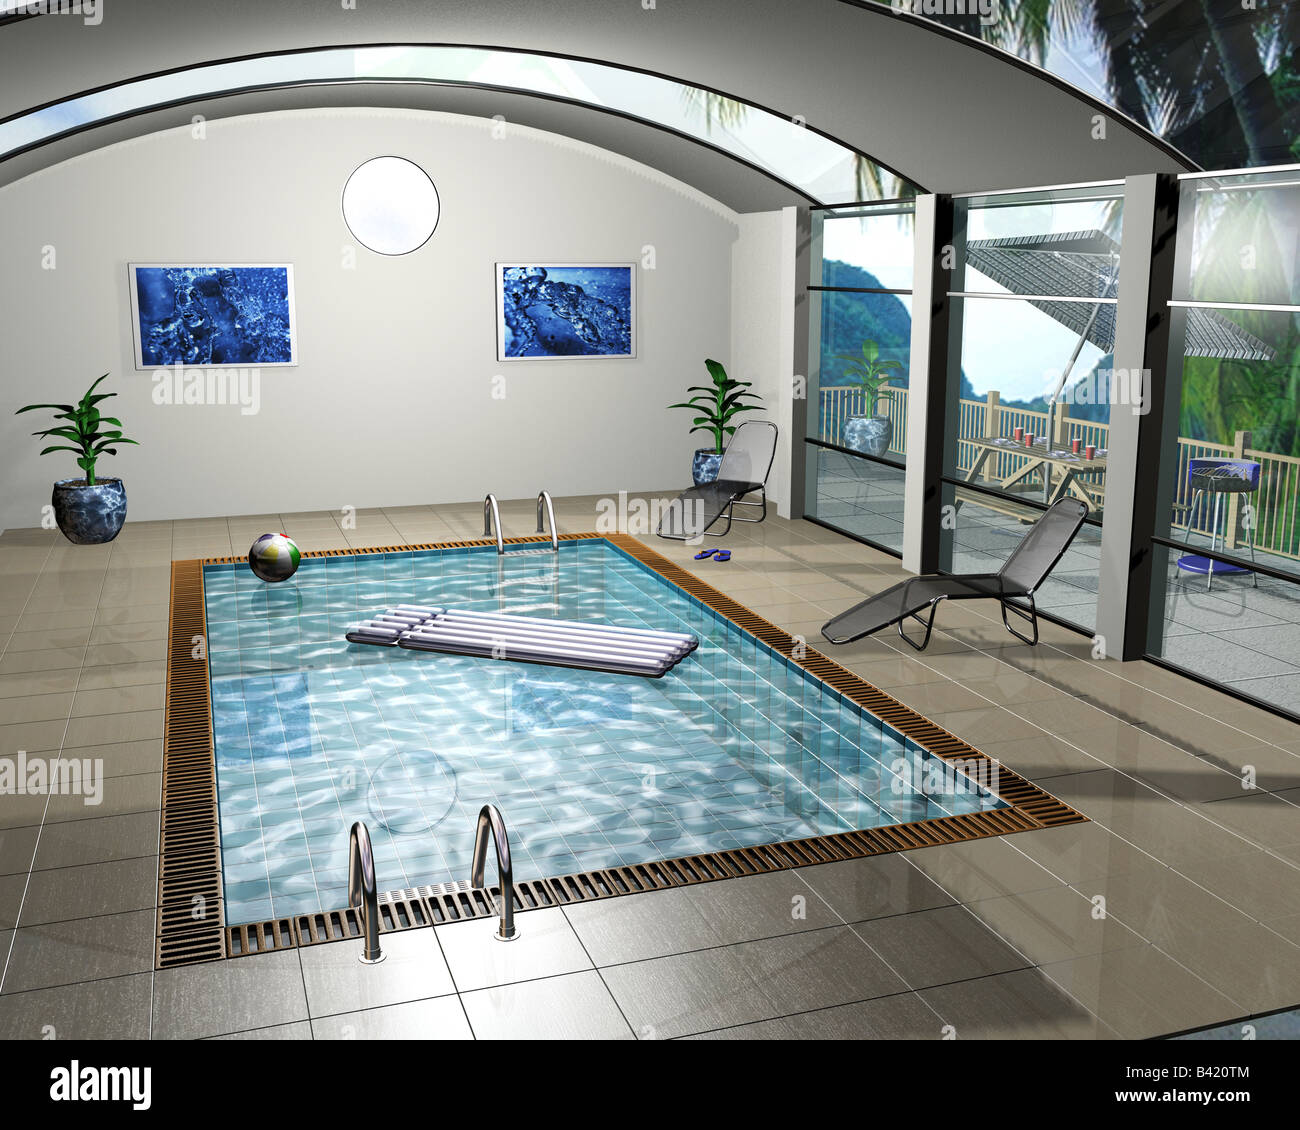 3D render of the interior of a pool house Stock Photo